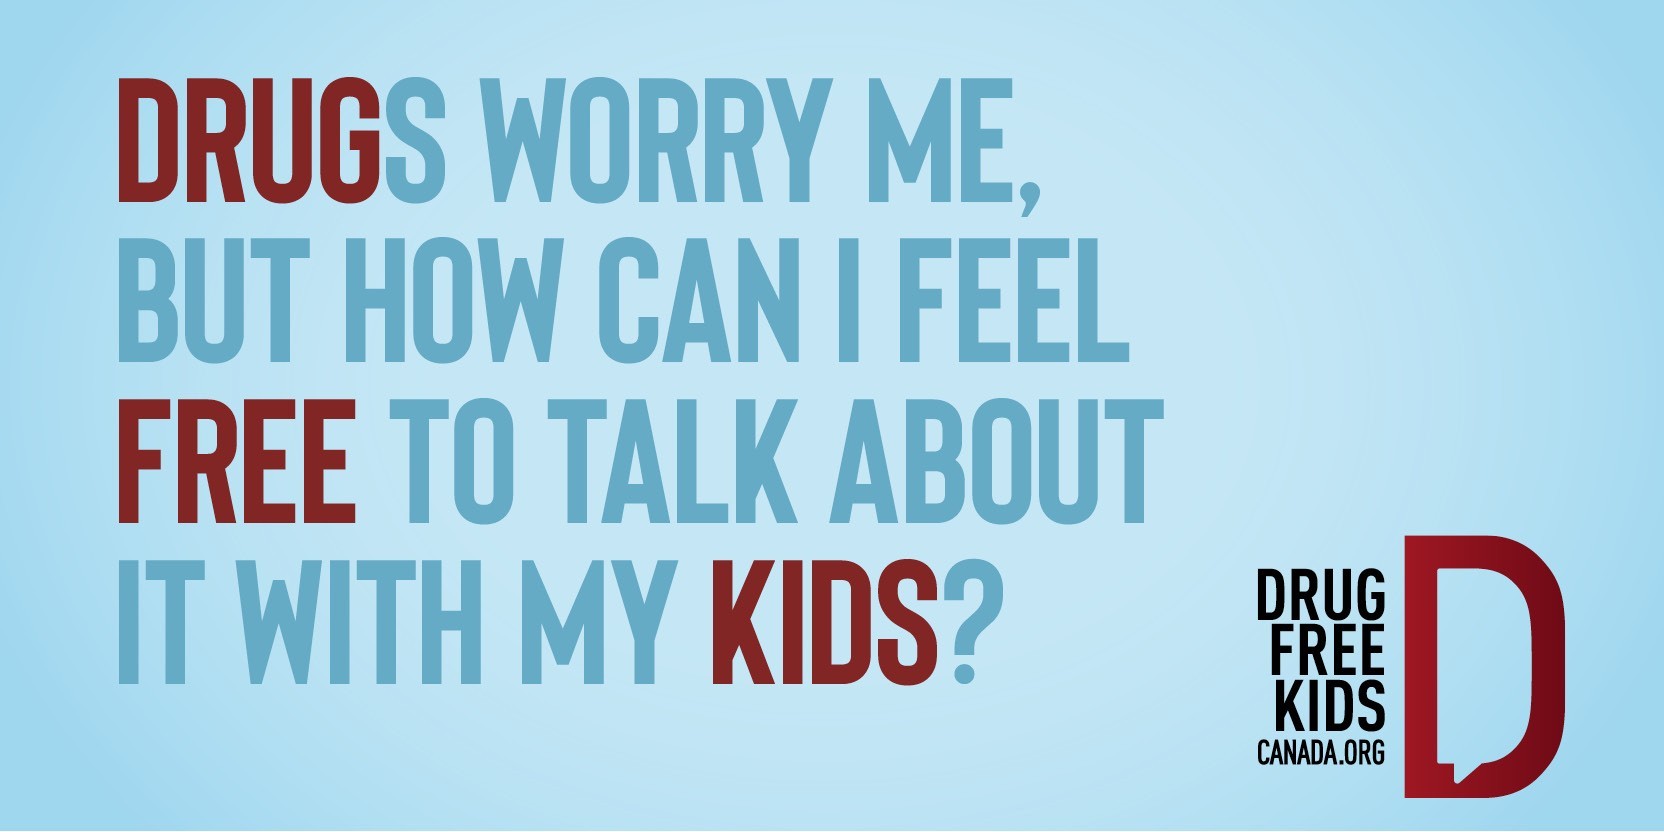 Drugs worry me, but how can I feel free to talk about it with my kids? 